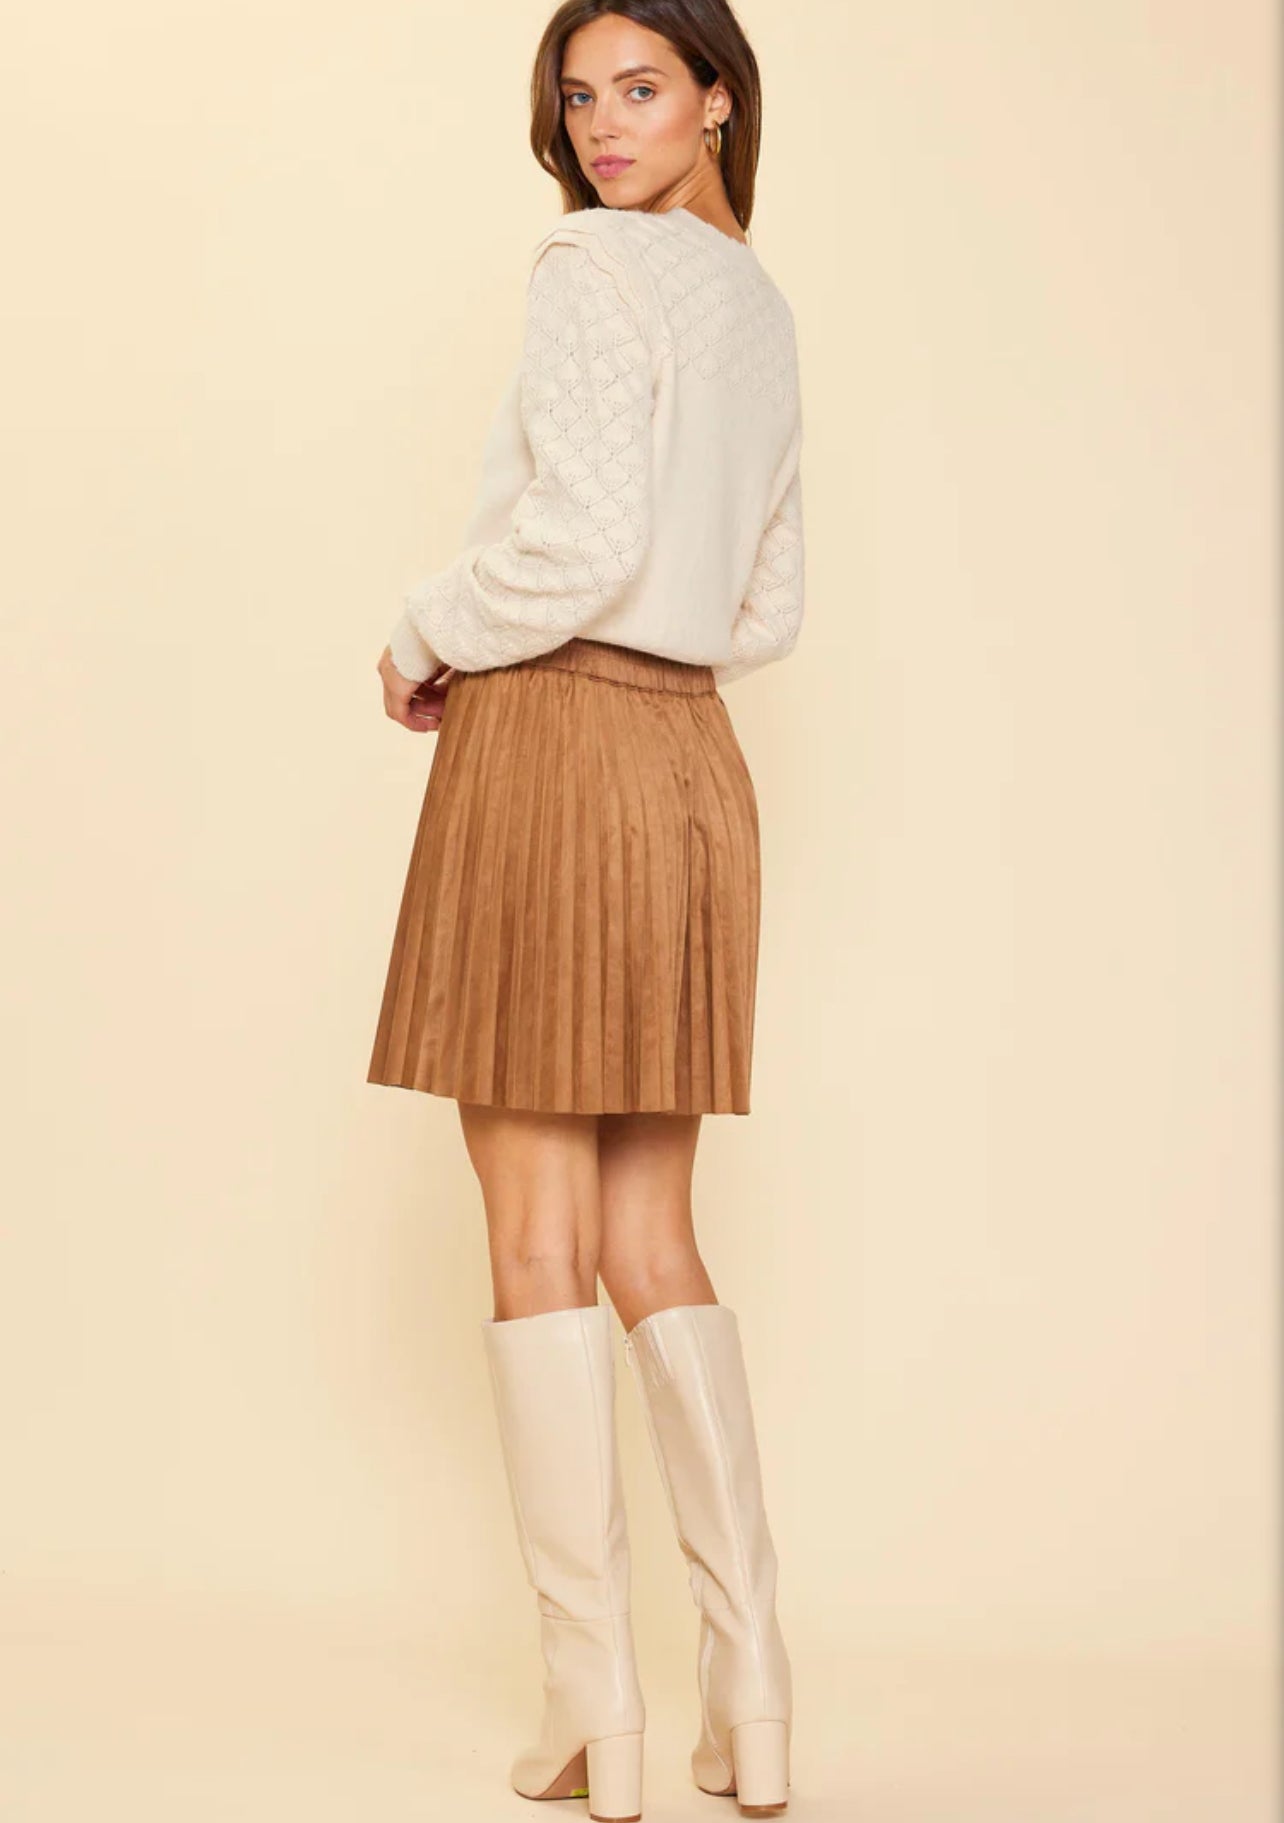 FAUX SUEDE PLEATED SKIRT